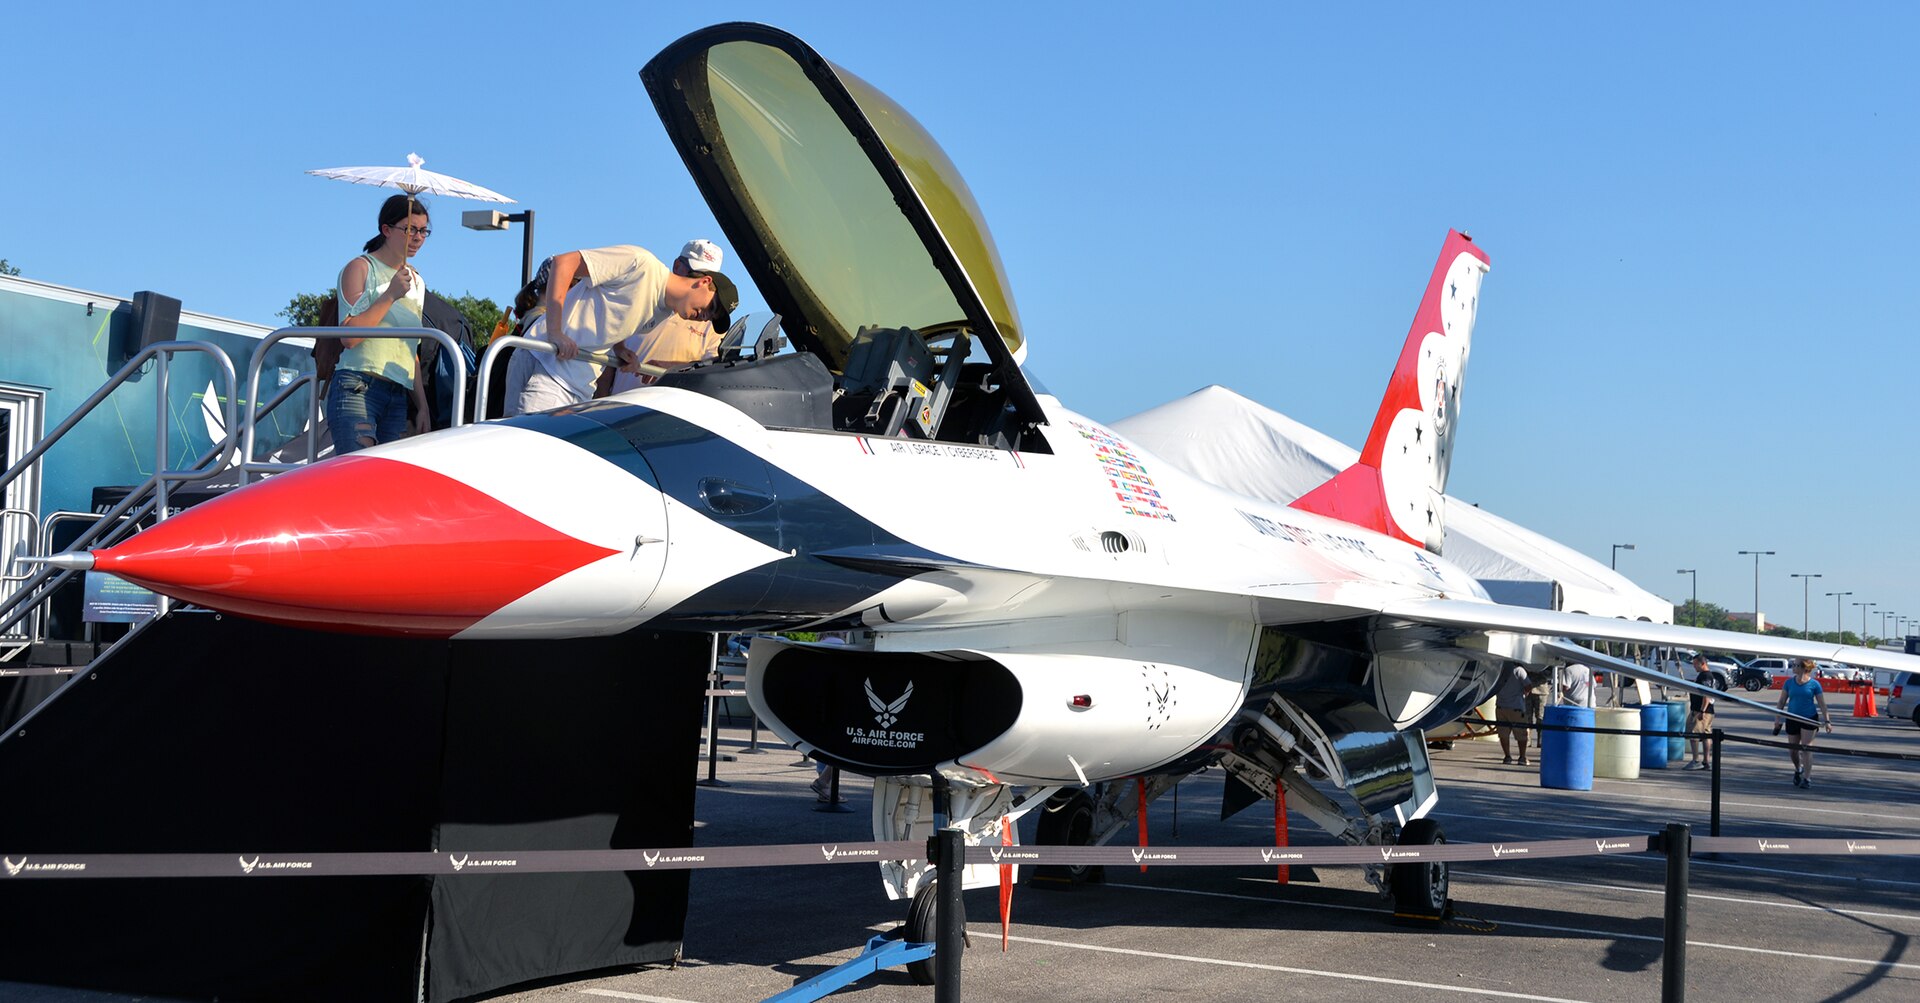 Getting an up-close-and-personal look at a U.S. Air Force Thunderbirds Air Demonstration Squadron F-16 Fighting Falcon aircraft was one of the highlights of the Military Appreciation Weekend celebration held May 5-6 at Joint Base San Antonio-Fort Sam Houston.